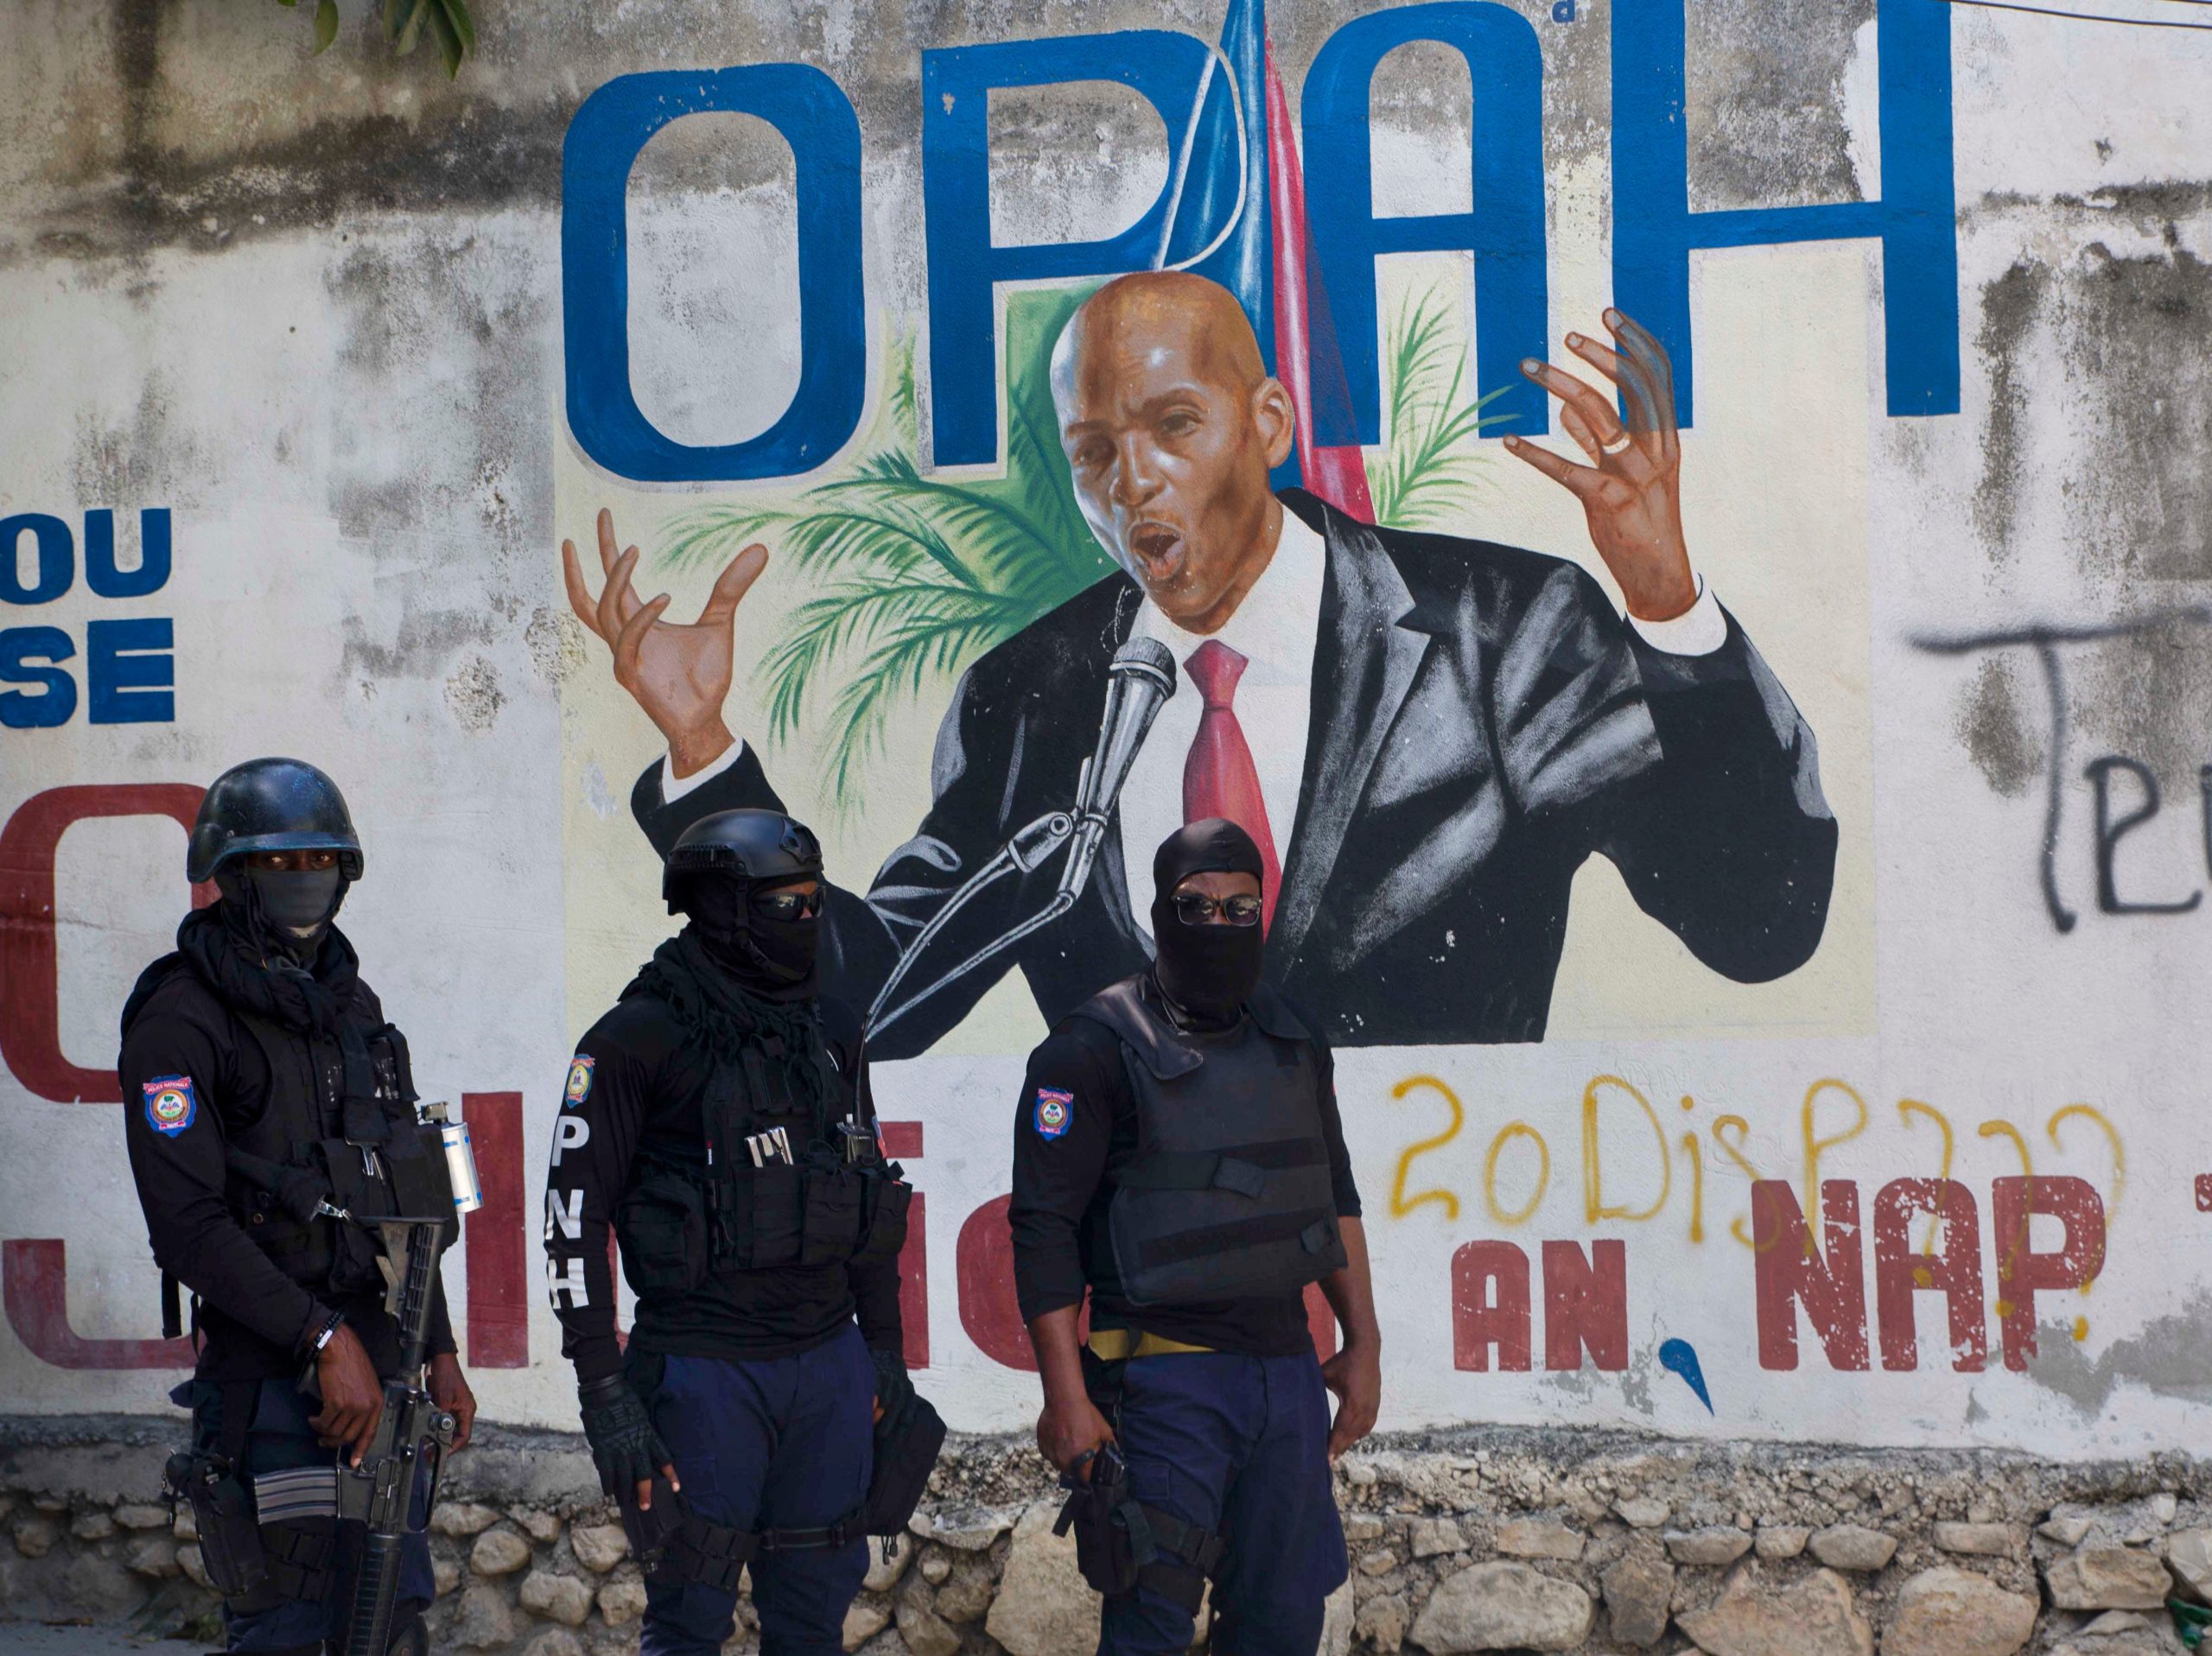 Armed police officers stand in front of a mural of Haitian President Jovenel Moïse